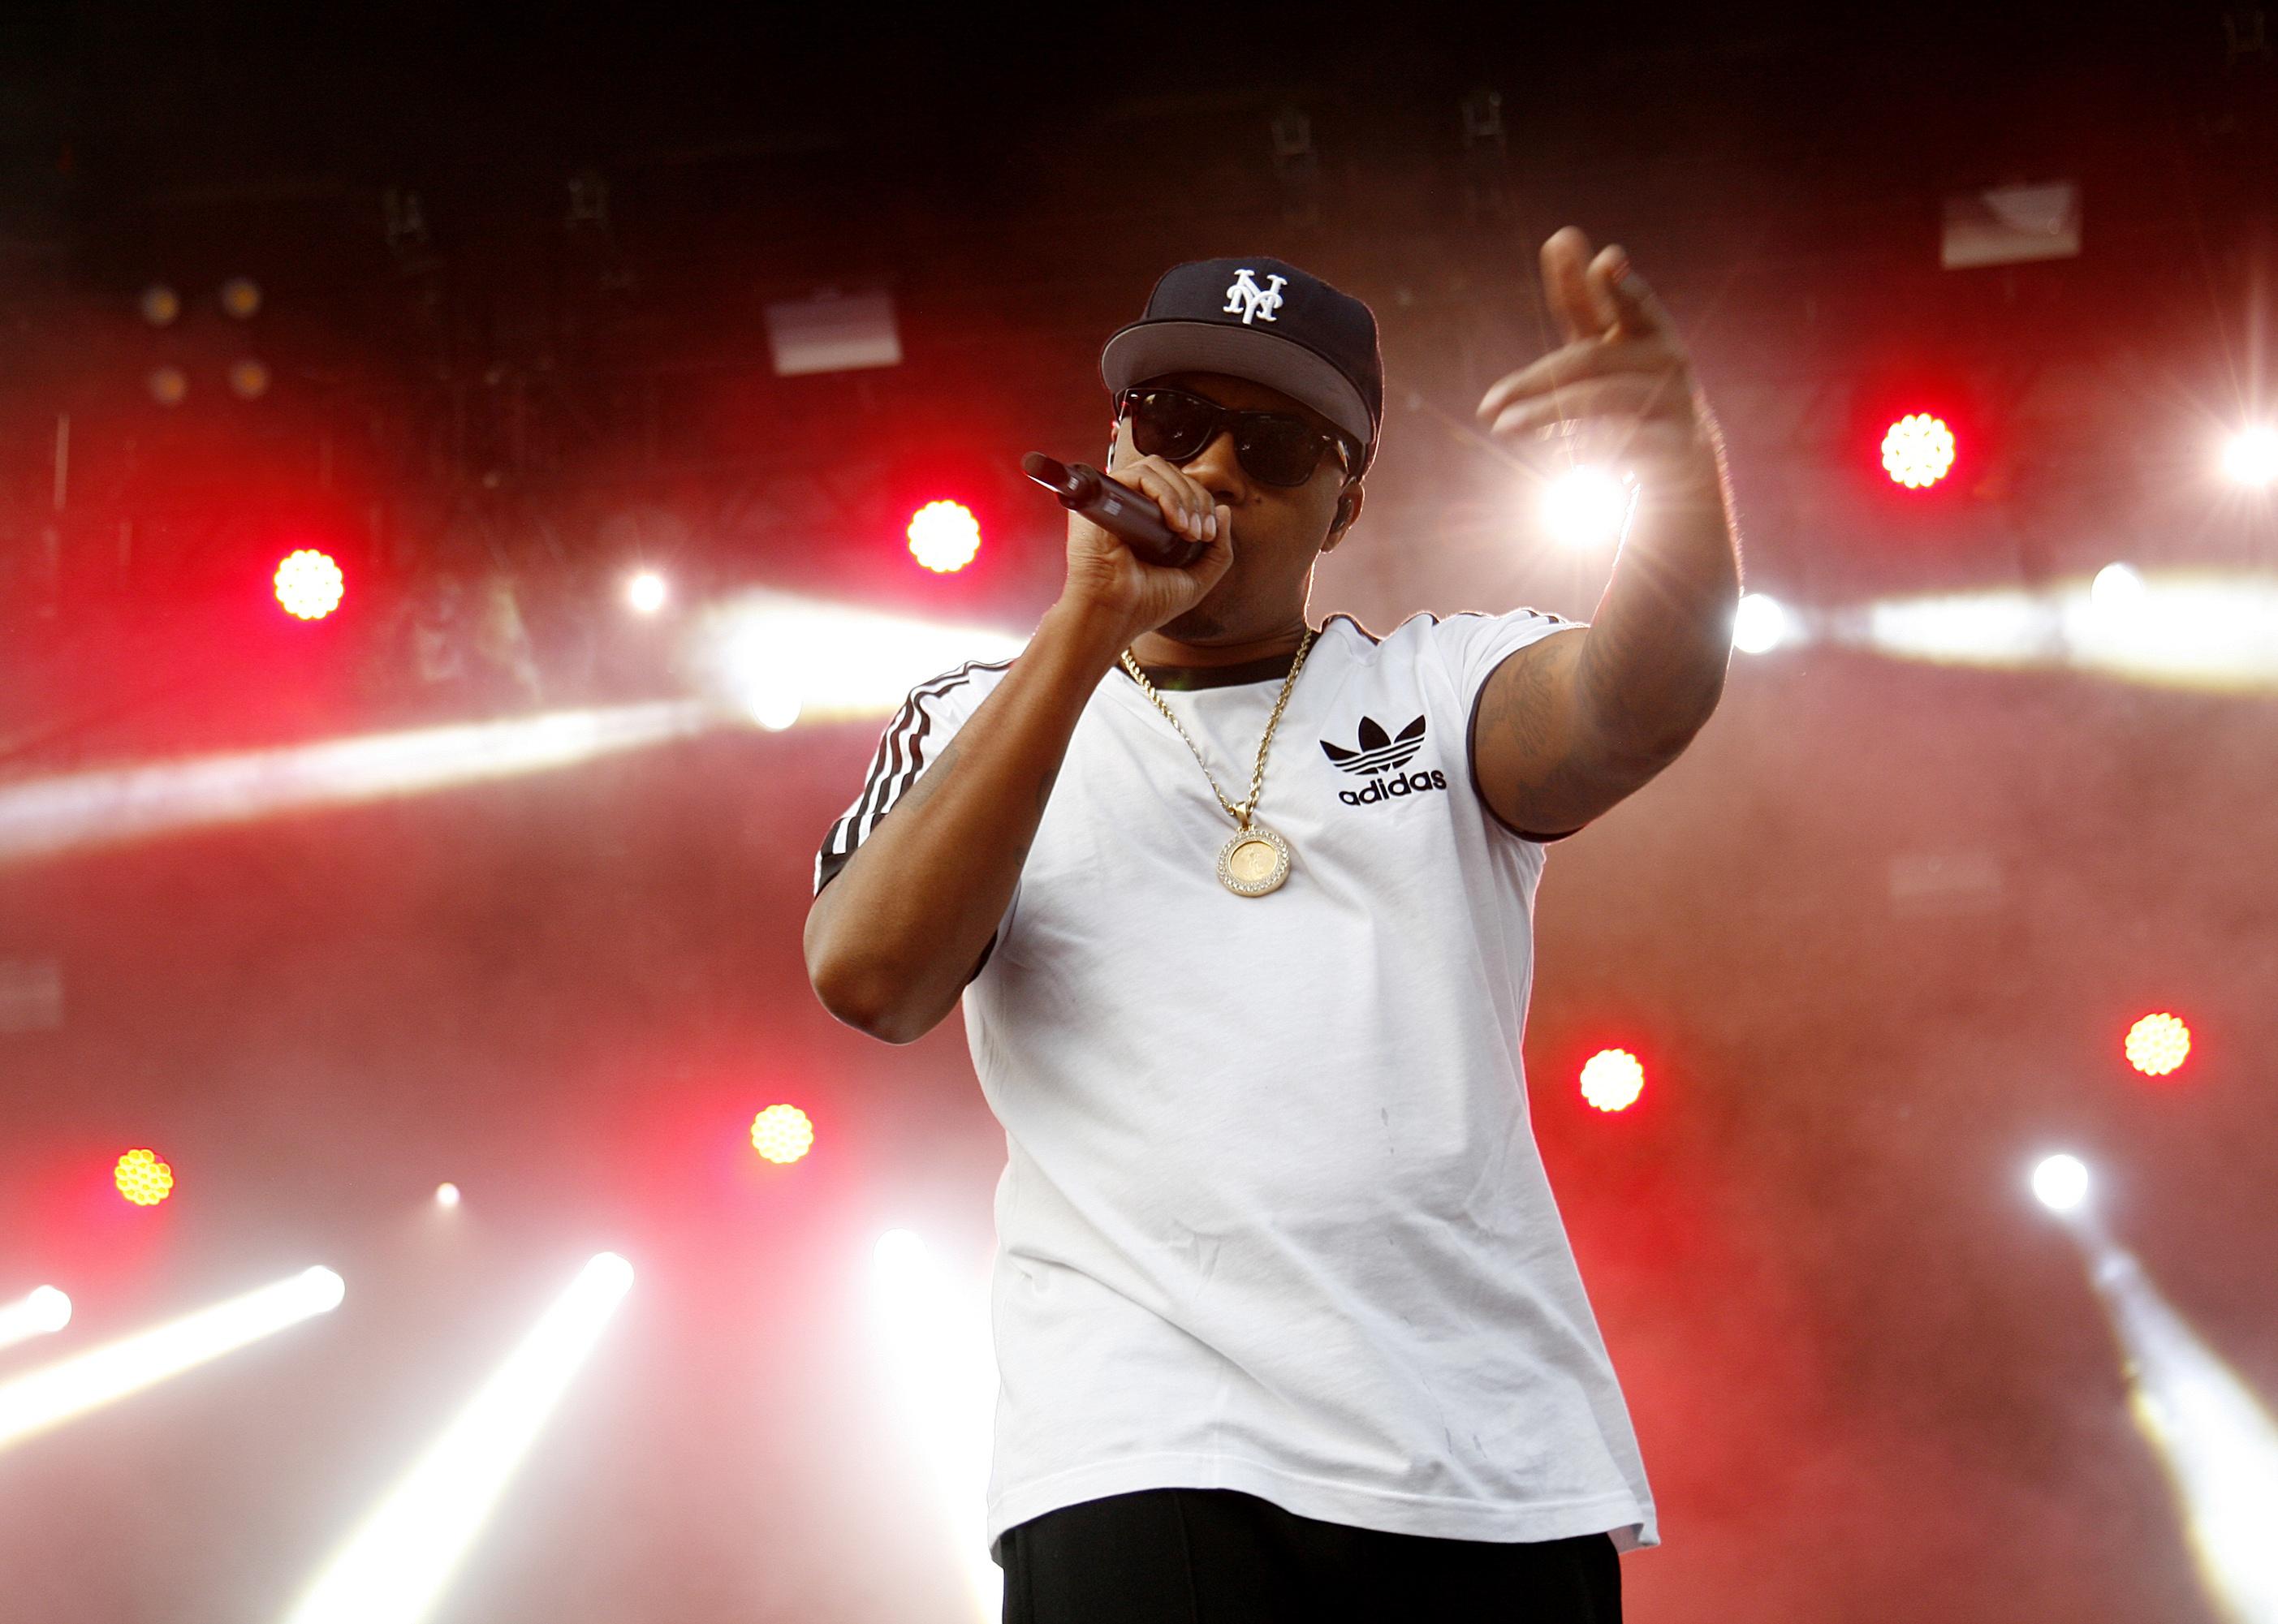 Nas performing onstage in a white adidas shirt.